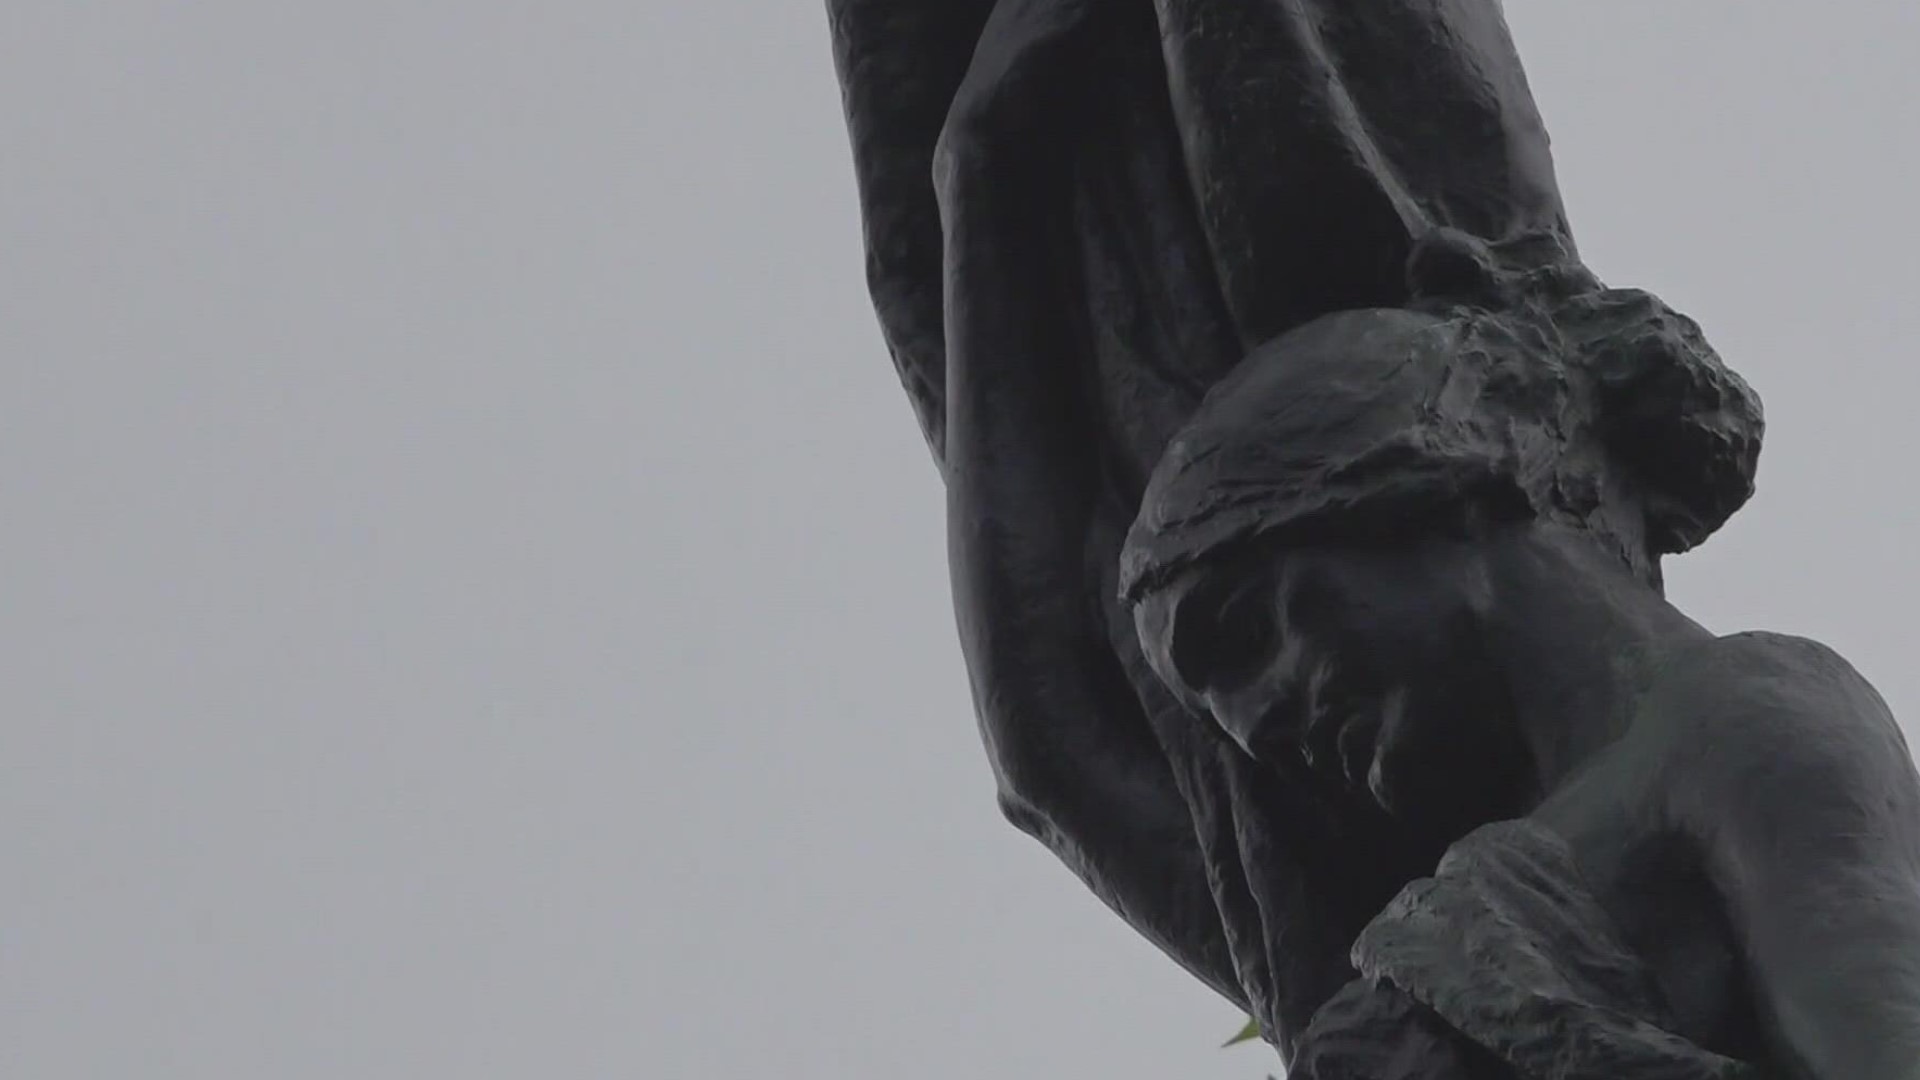 A bill that would allow voters to decide to remove confederate monuments got denied by city council in last night’s meeting with a 6 to 13 vote.